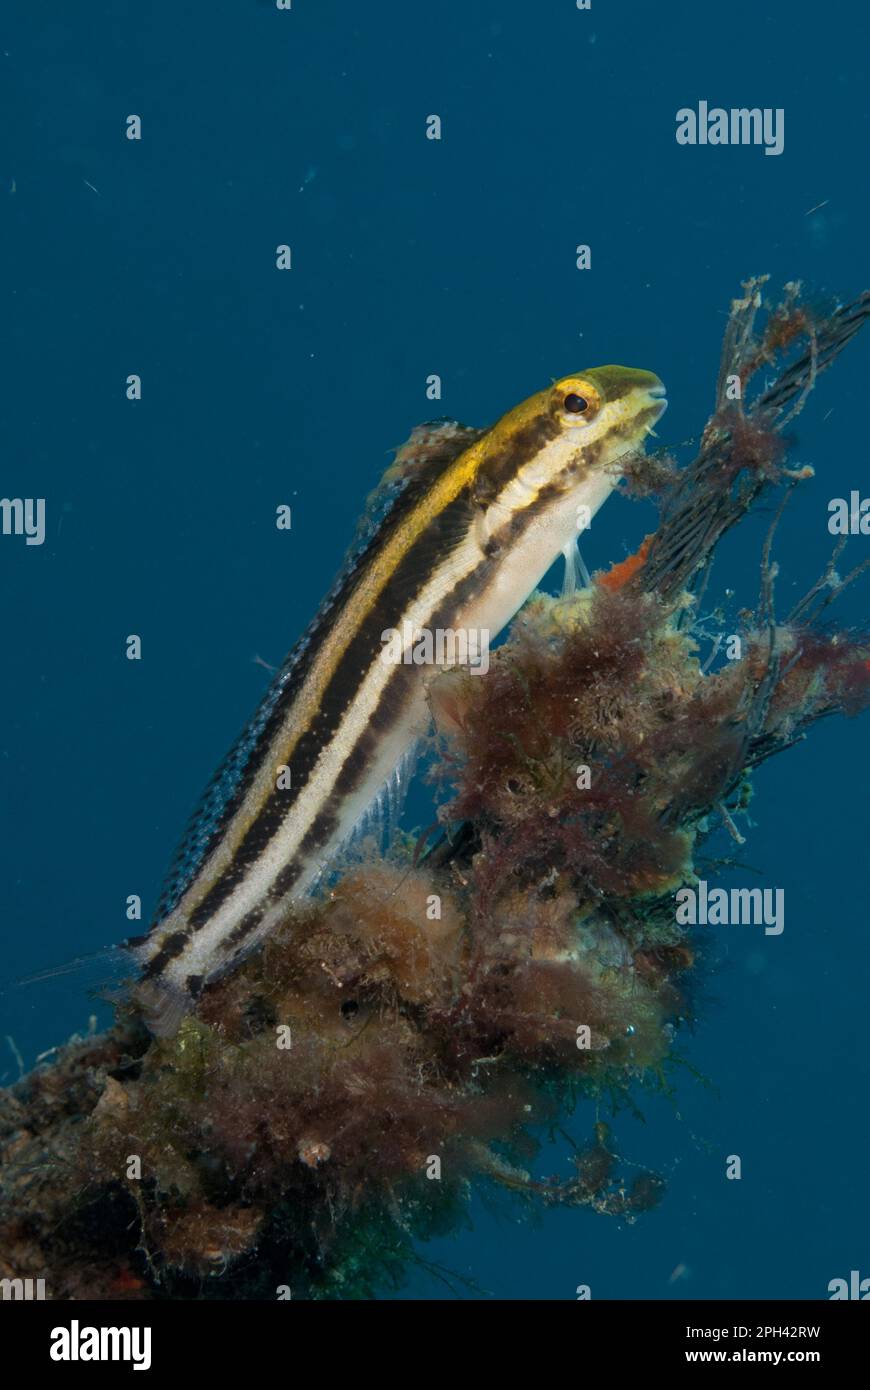 Sabretooth blenny, Sabretooth blennies, Other animals, Fish, Animals, Blennies, Lined Fangblenny (Meiacanthus lineatus) adult, resting on coral Stock Photo